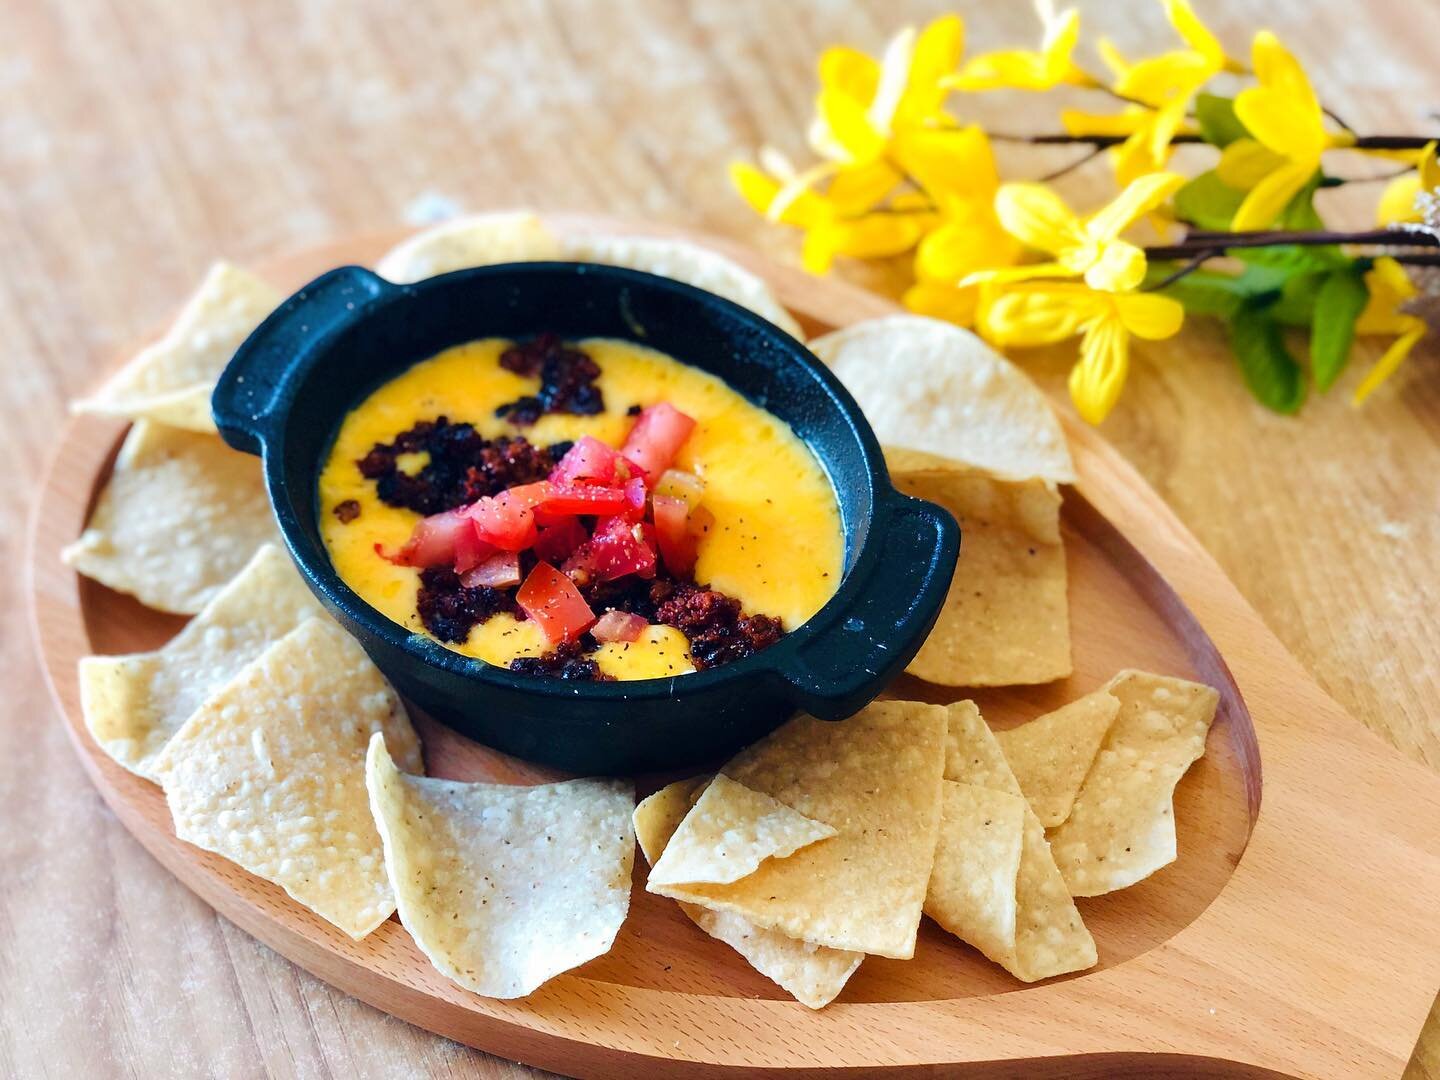 Come Try Our Queso Fundido!
Topped With Chorizo And Diced Tomatoes, Our Queso Fundido Is A Combination Of Delicious Cheeses!
Dine-In or Takeout!
Call Us At (520)748-1032!